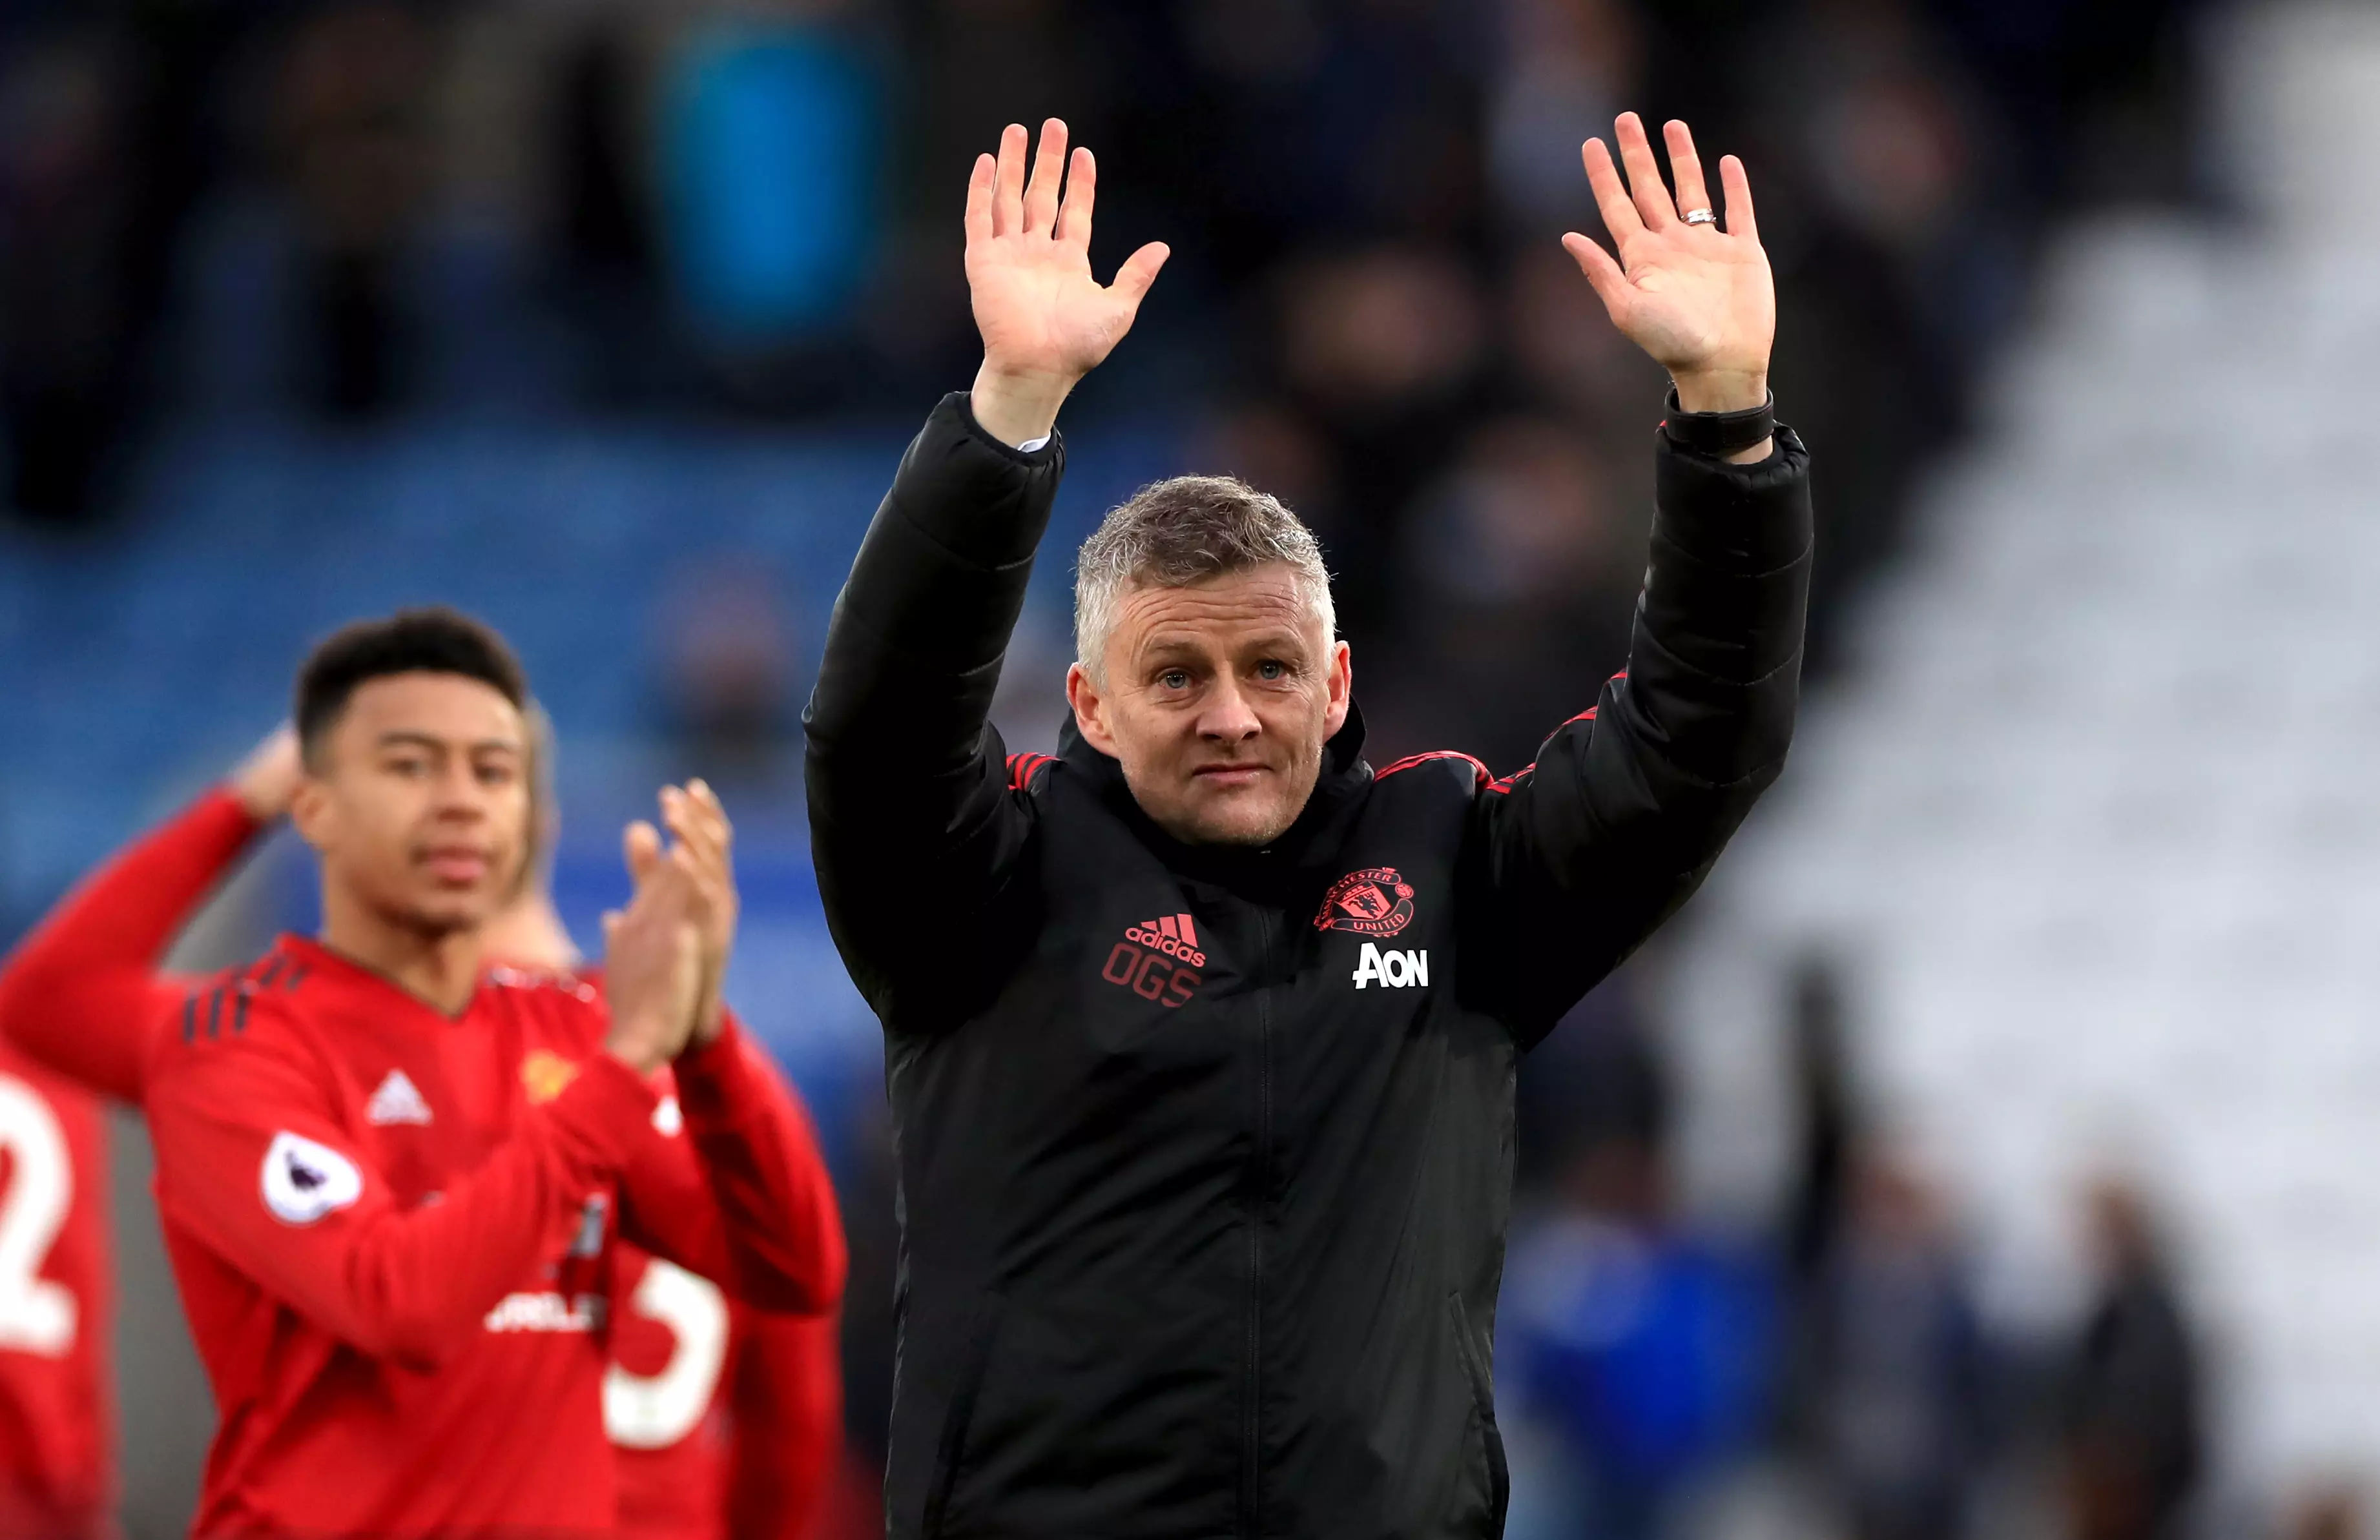 Solskjaer thanks the away fans after United's win over Leicester on Sunday. Image: PA Images